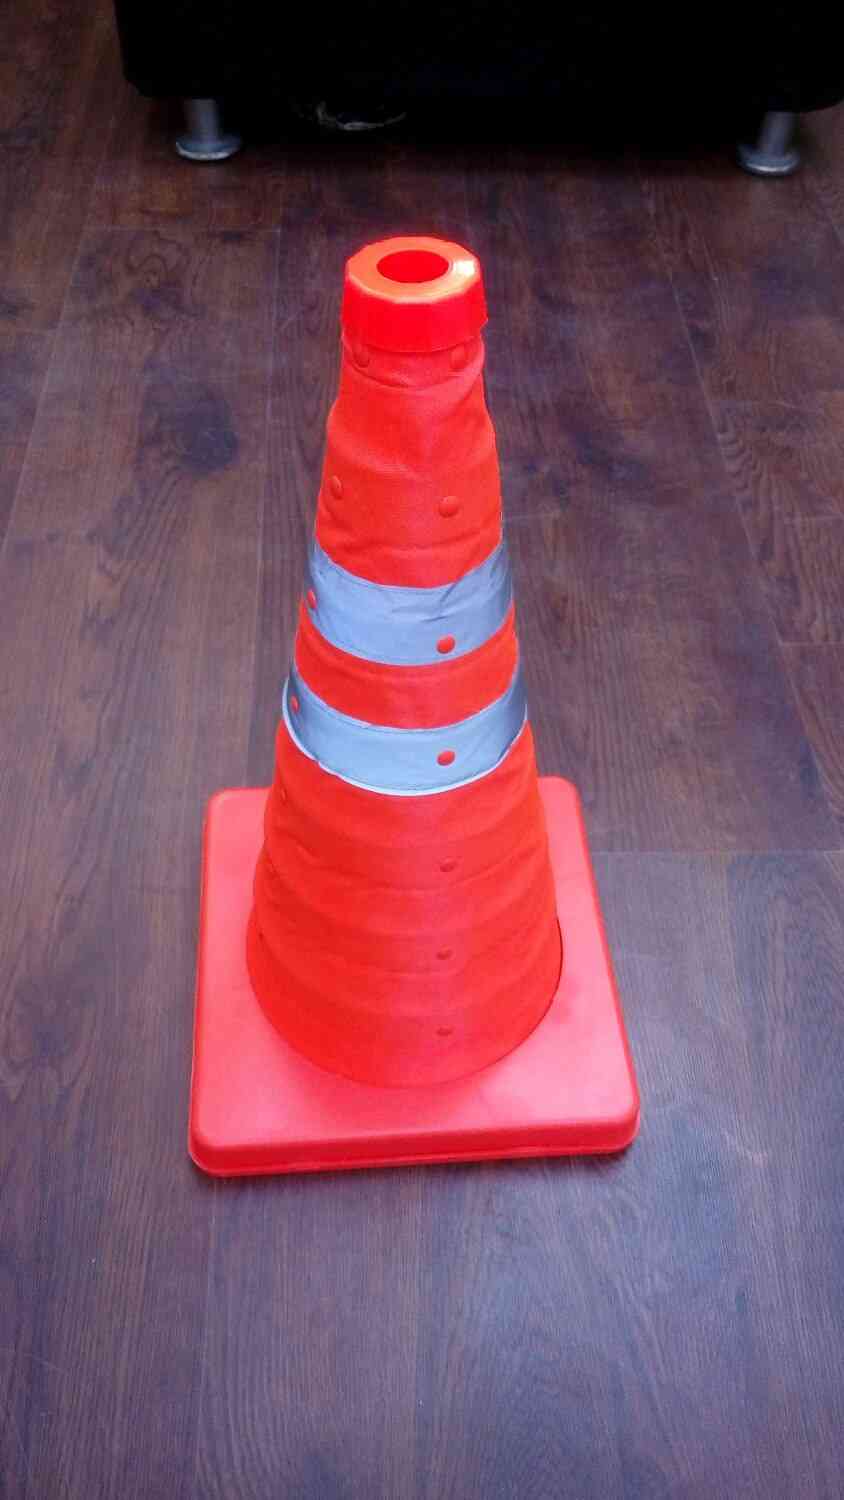 Cones Warning Reflective Plastic Road Cone Road Traffic Safety Sign